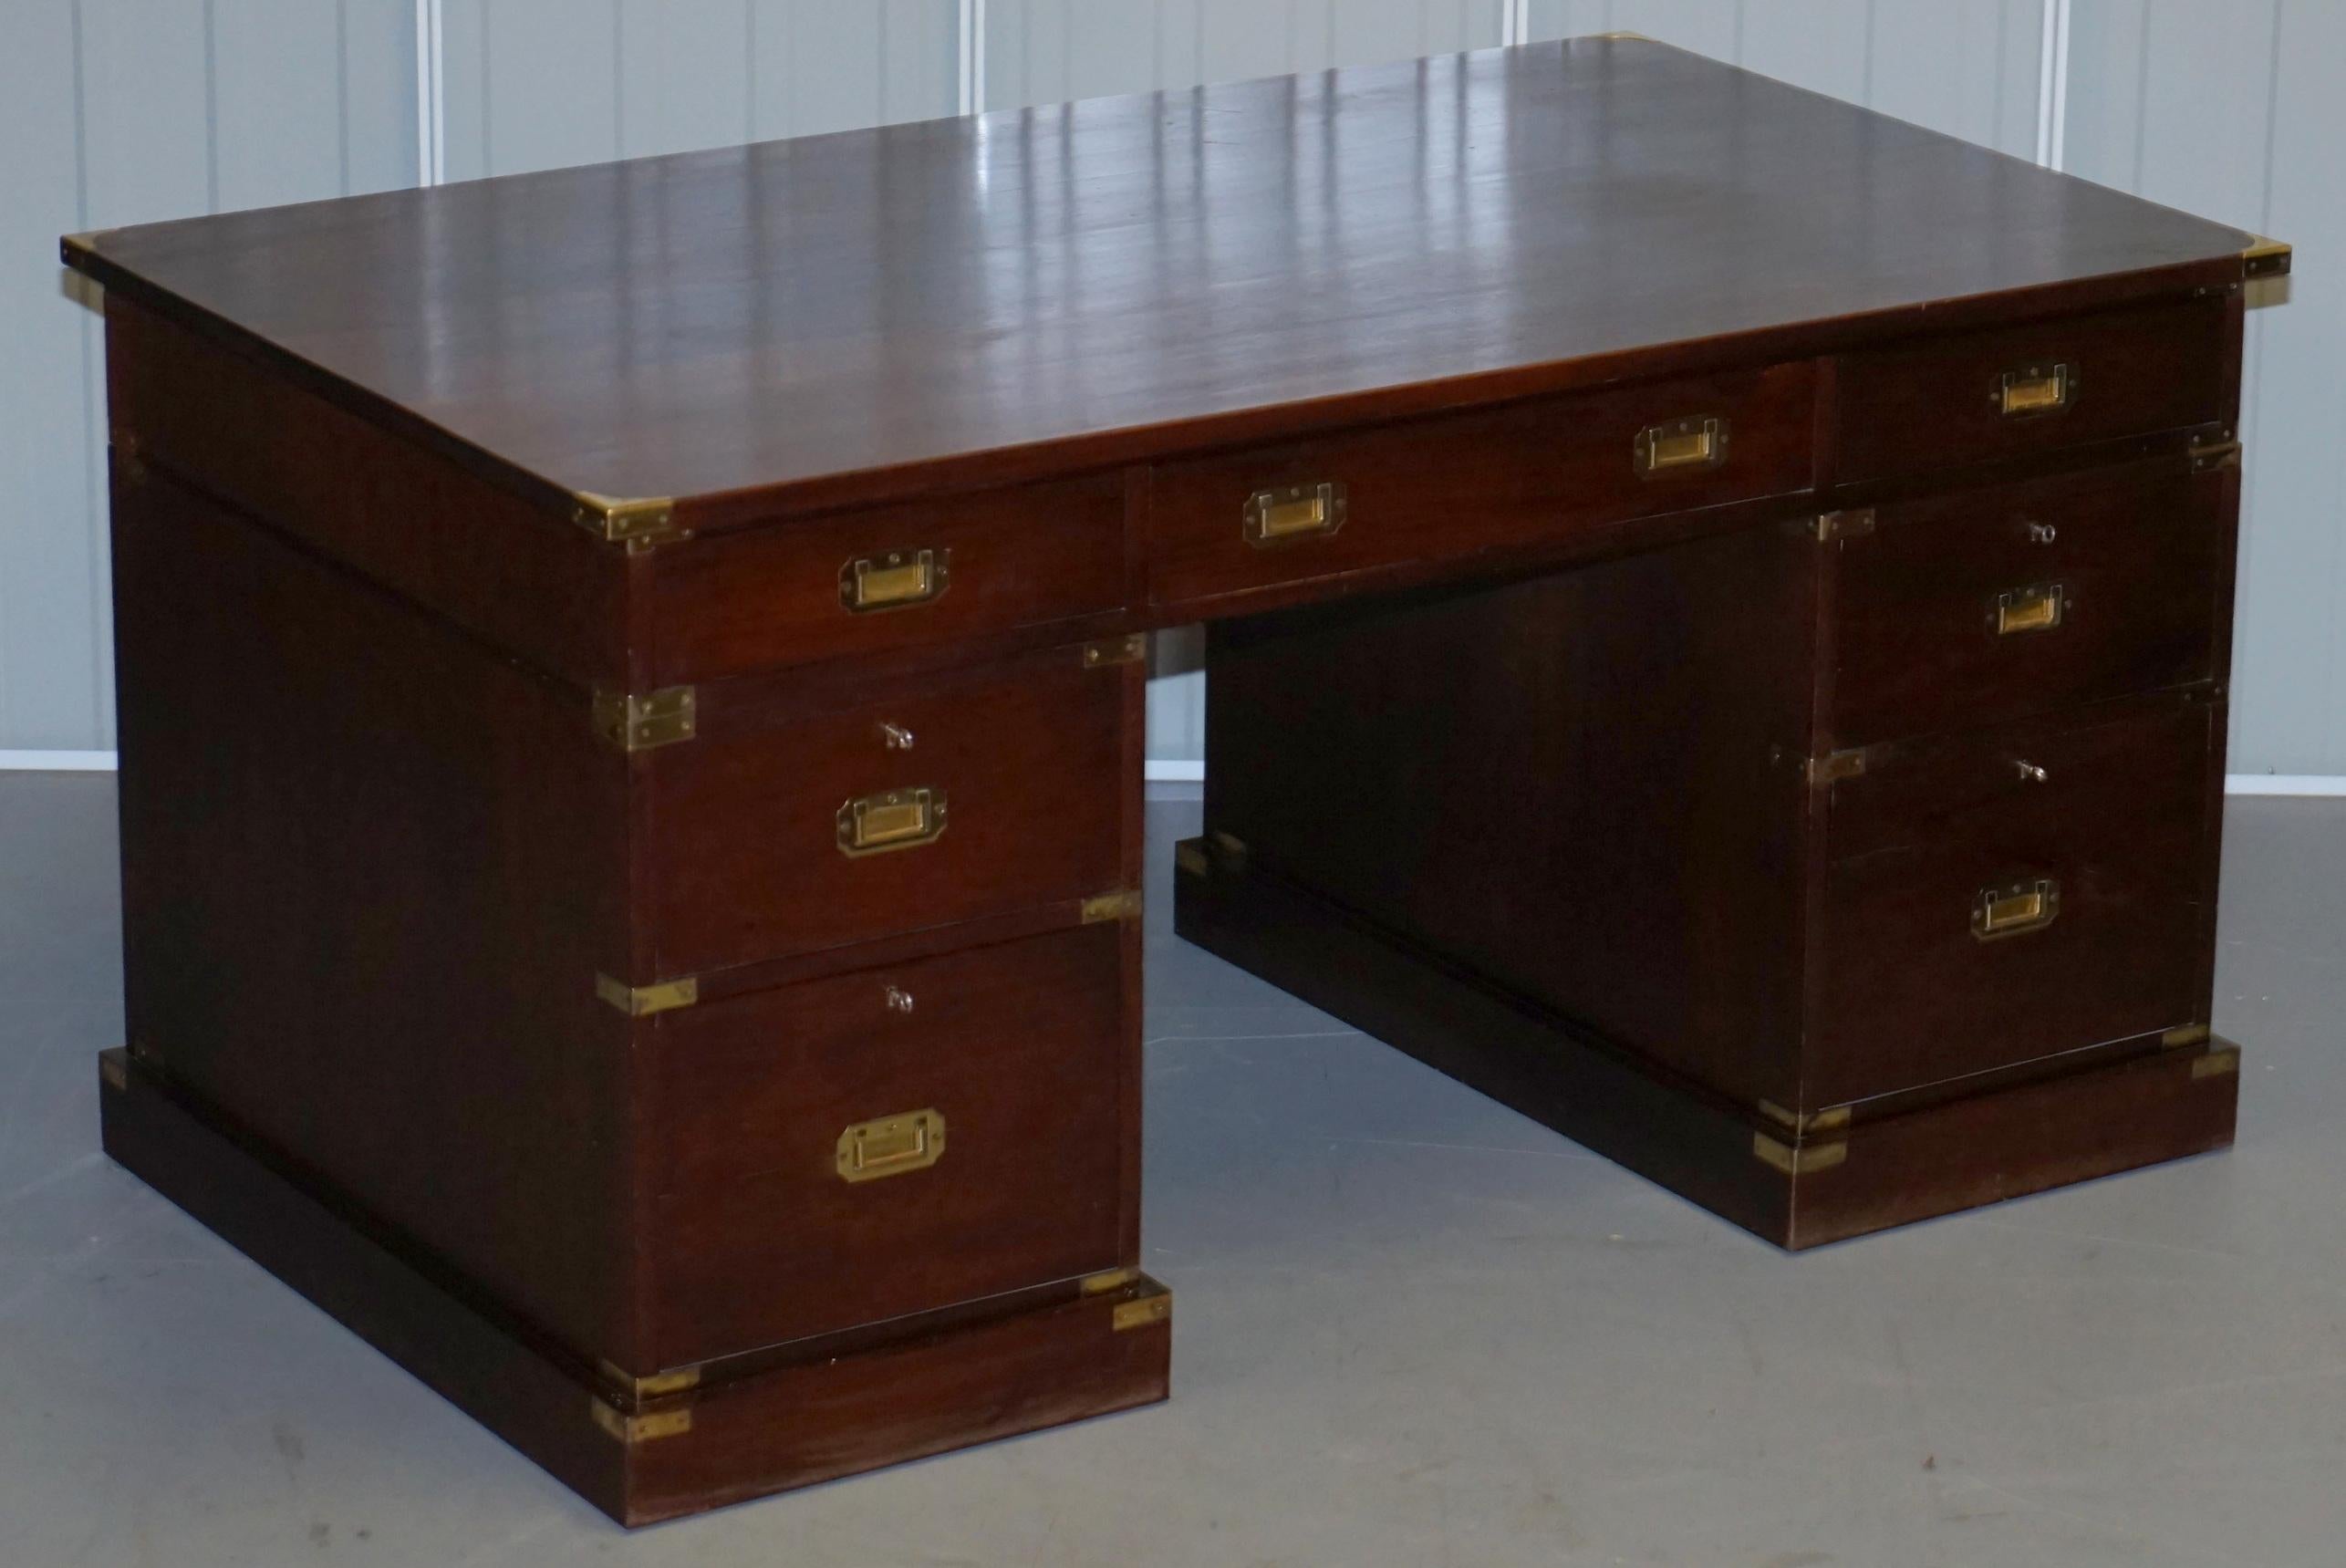 We are delighted to offer for sale this lovely very solid double-sided with bookcase back, hand made Military Campaign twin pedestal partner desk in solid mahogany and satinwood

I have the matching tall large three drawer filing cabinet listed